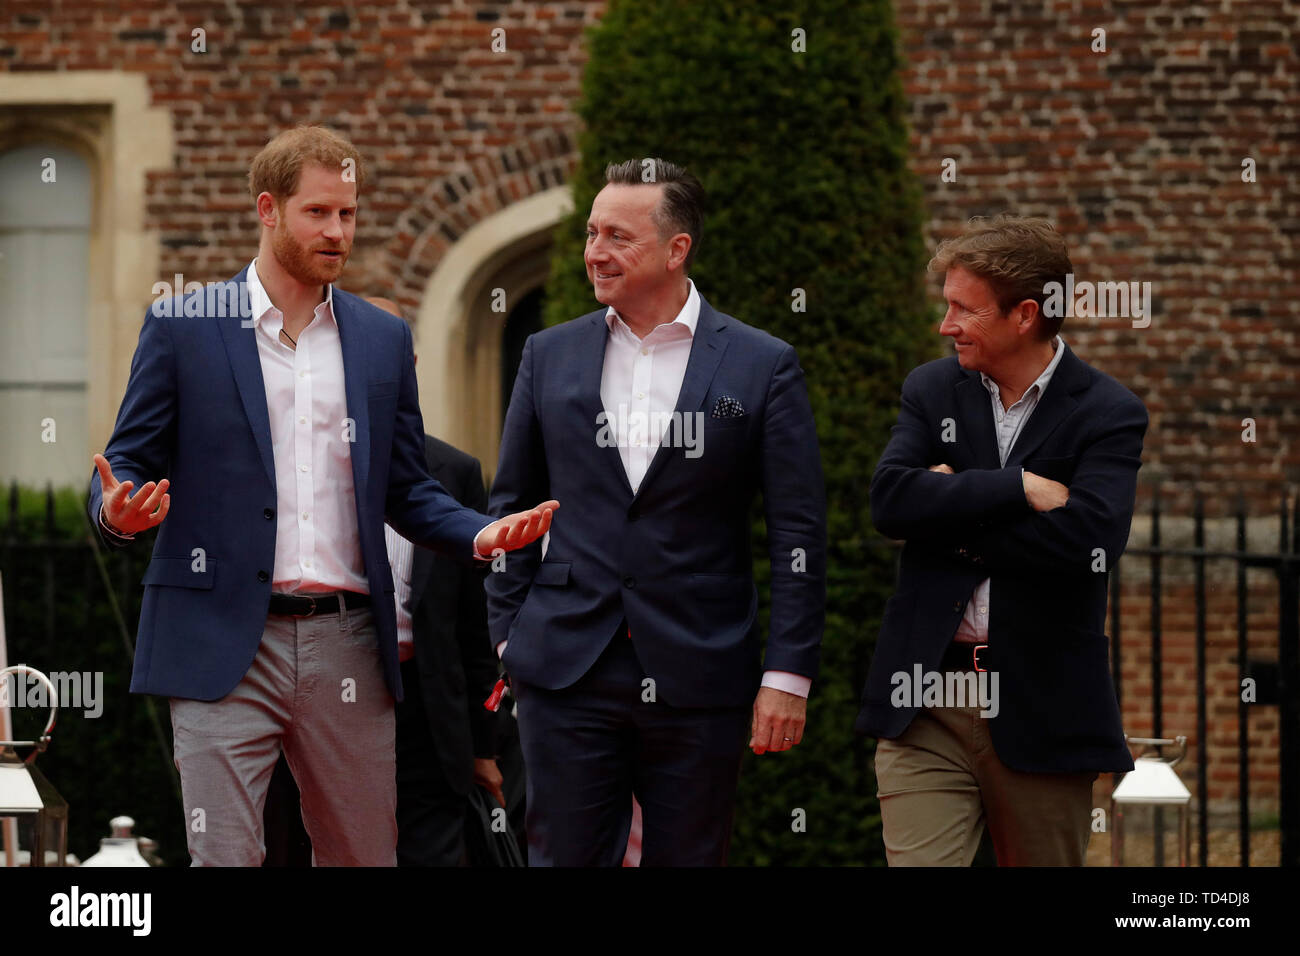 The Duke of Sussex walks with the Managing Director of Audi UK Andrew Doyle (centre) and the Chairman of Sentebale Johnny Hornby before a concert hosted by Sentebale in Hampton Court Palace in East Molesey, to raise awareness and vital funds for the Duke's charity, Sentebale, which helps young people in southern Africa affected by HIV. Stock Photo